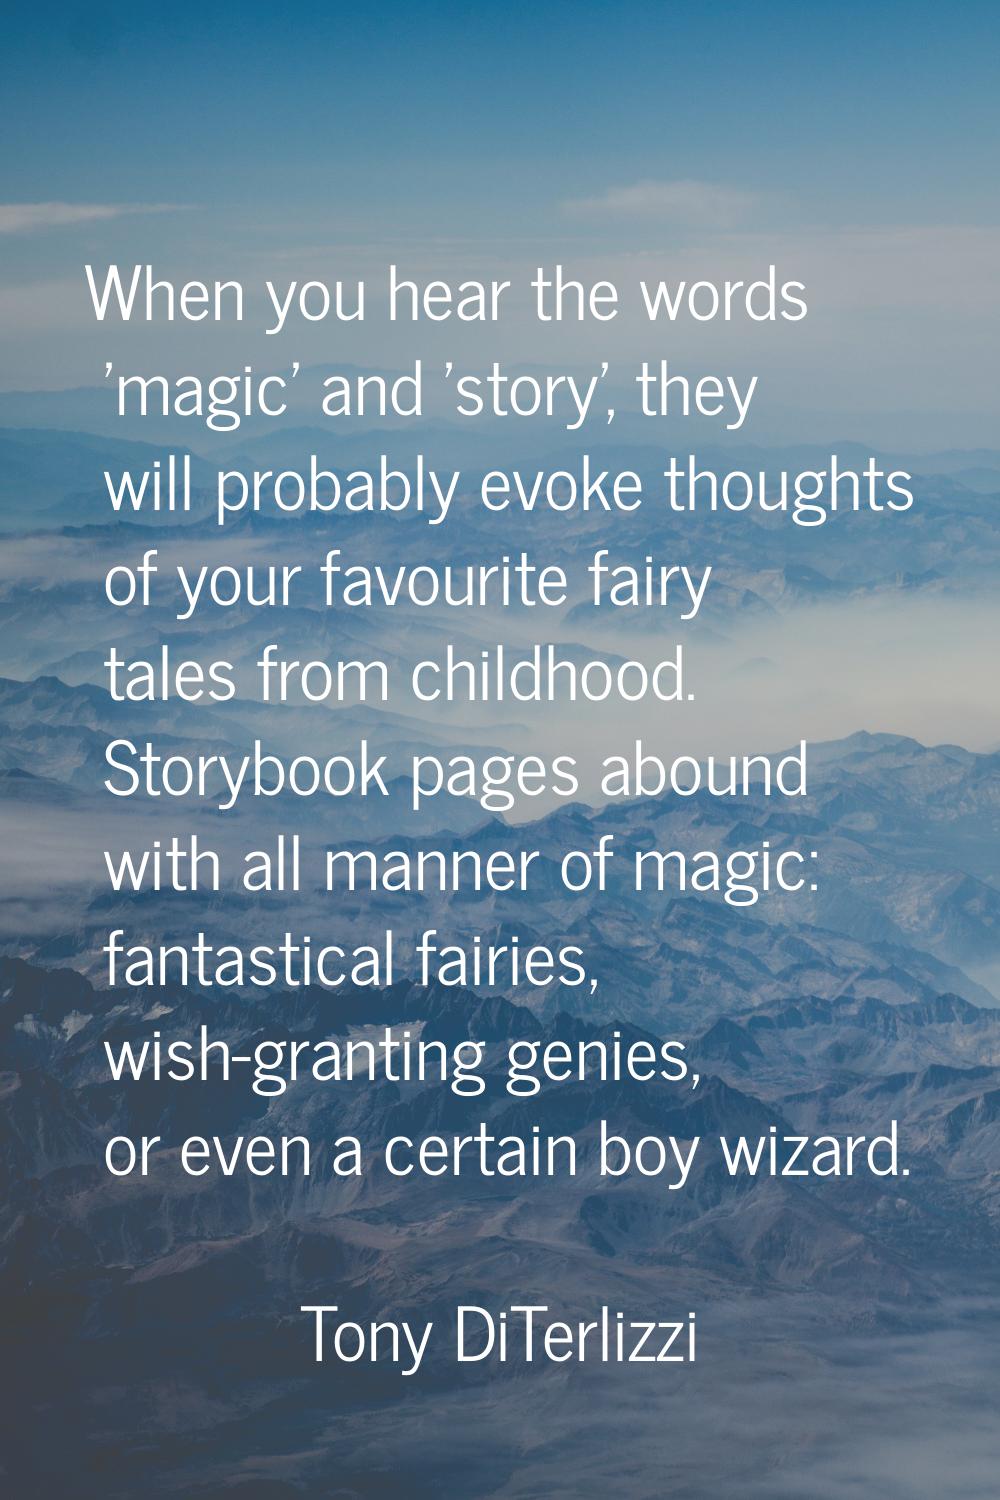 When you hear the words 'magic' and 'story', they will probably evoke thoughts of your favourite fa